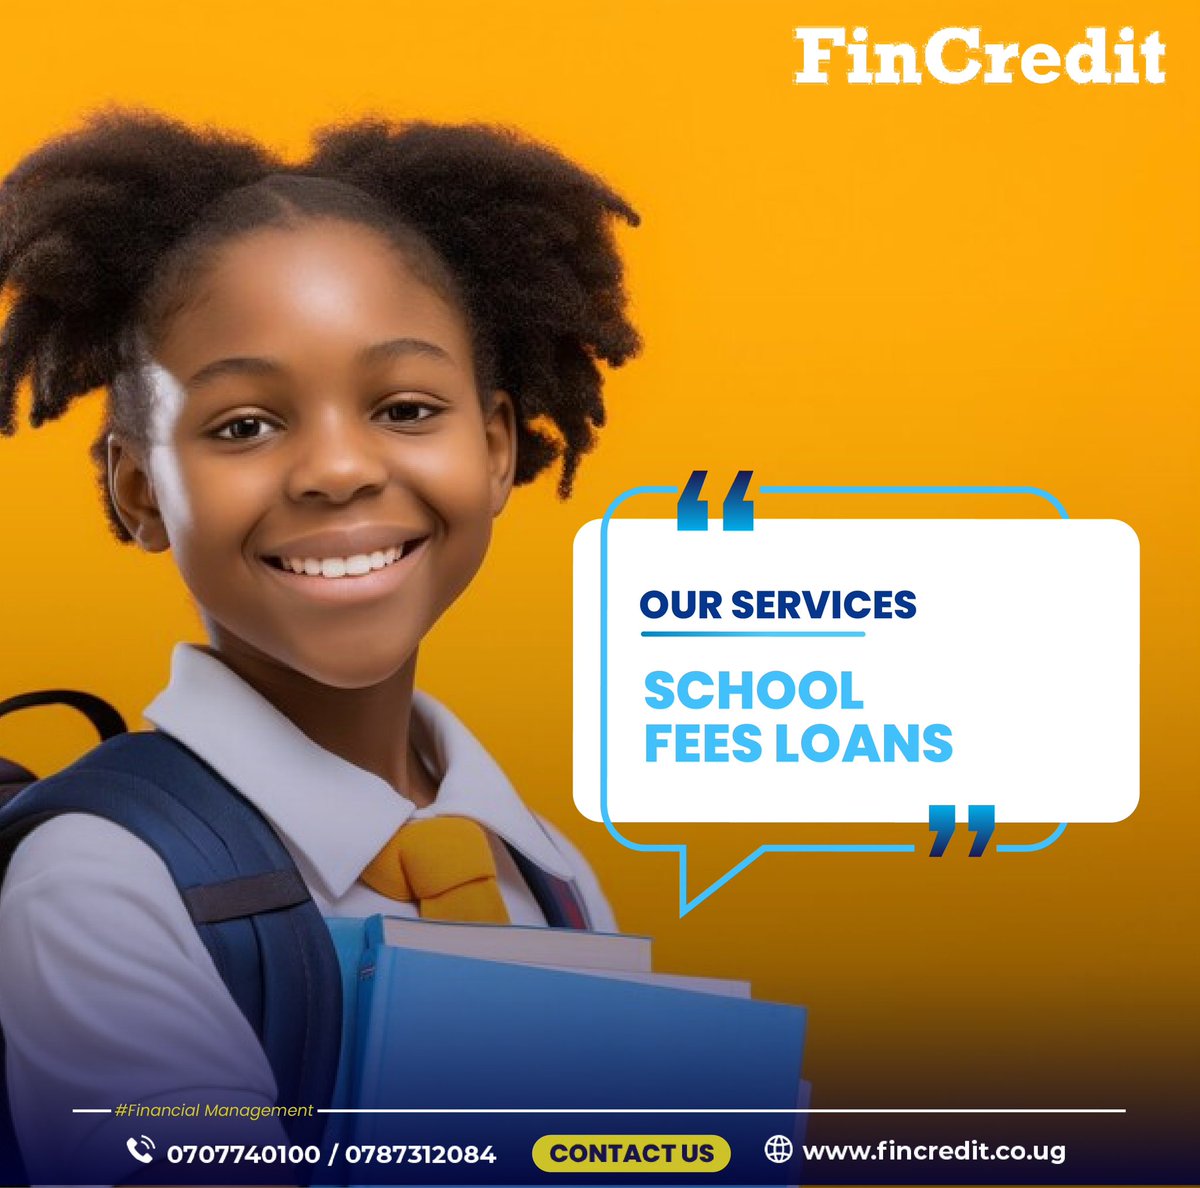 Make every semester stress-free! 🎓 Our school fees loans are designed to keep the focus on learning, not on fees. Apply today and invest in a brighter future! #Fincredit #SchoolFeesMadeEasy #EducationFirst #InvestInEducation